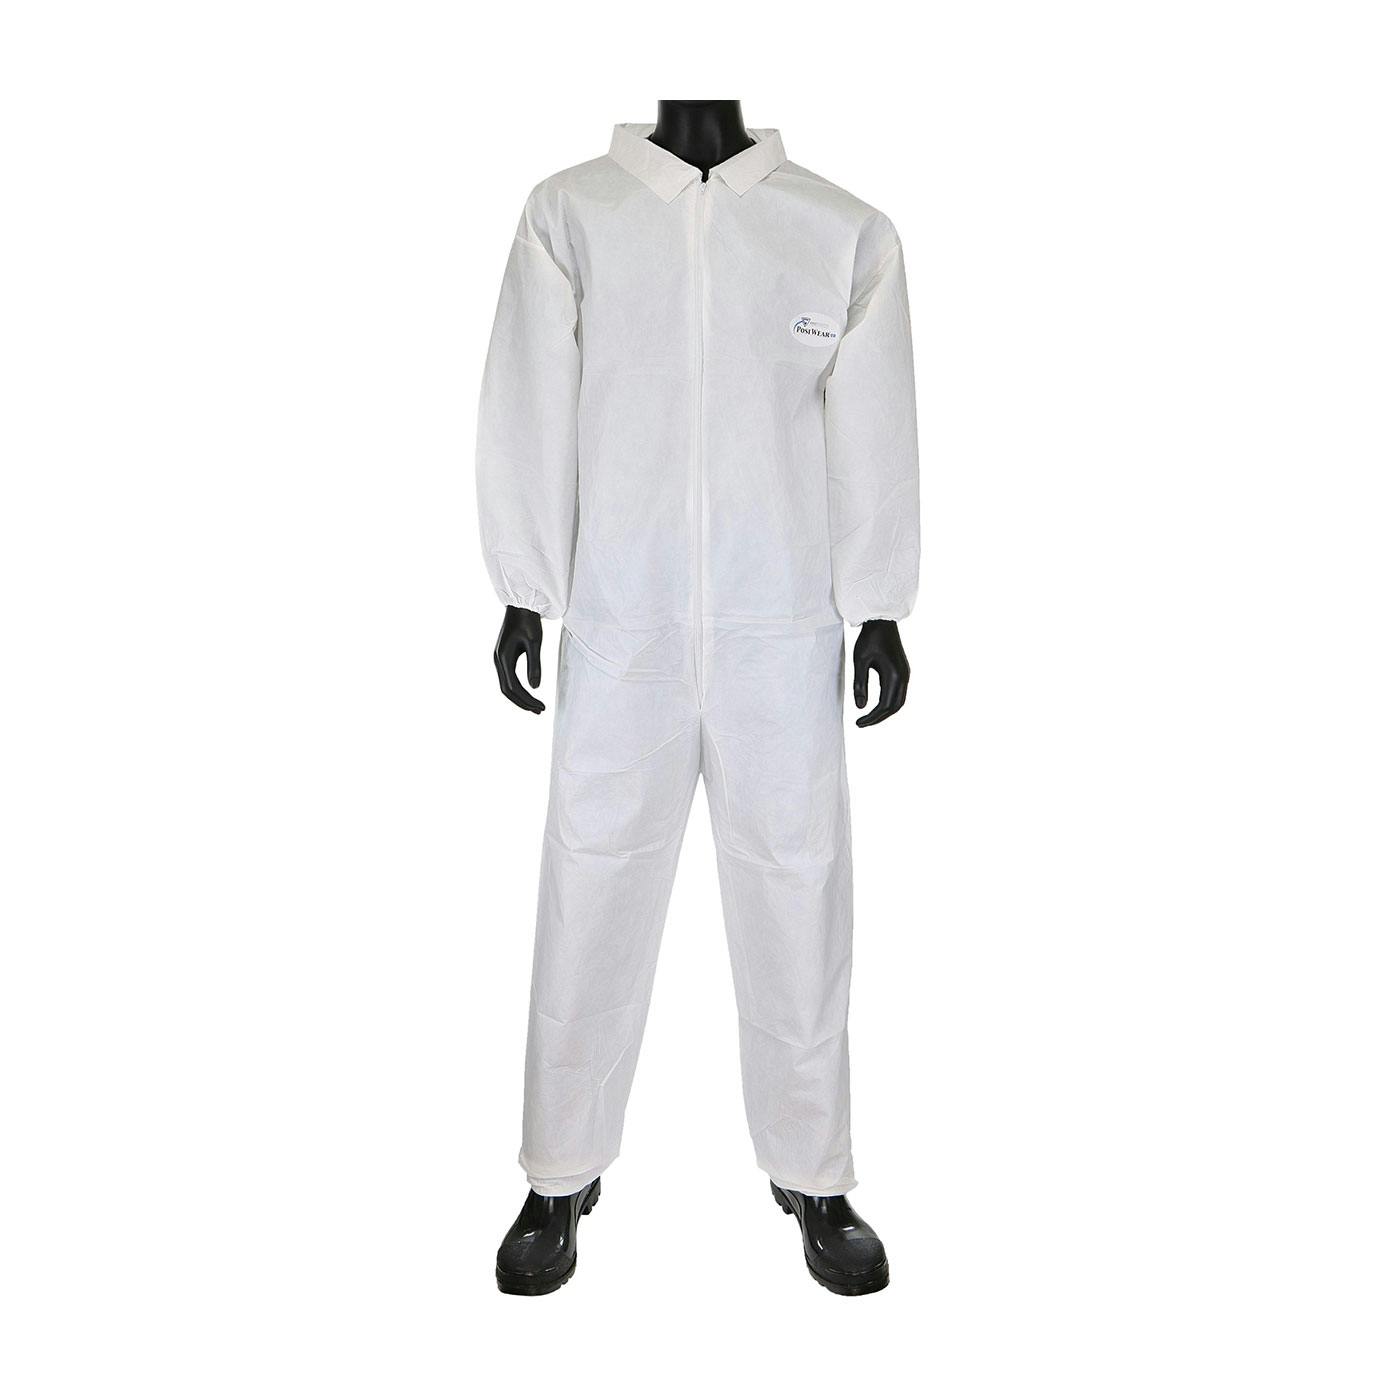 PosiWear UB Coverall with Elastic Wrist & Ankle 56 gsm, White (3702)